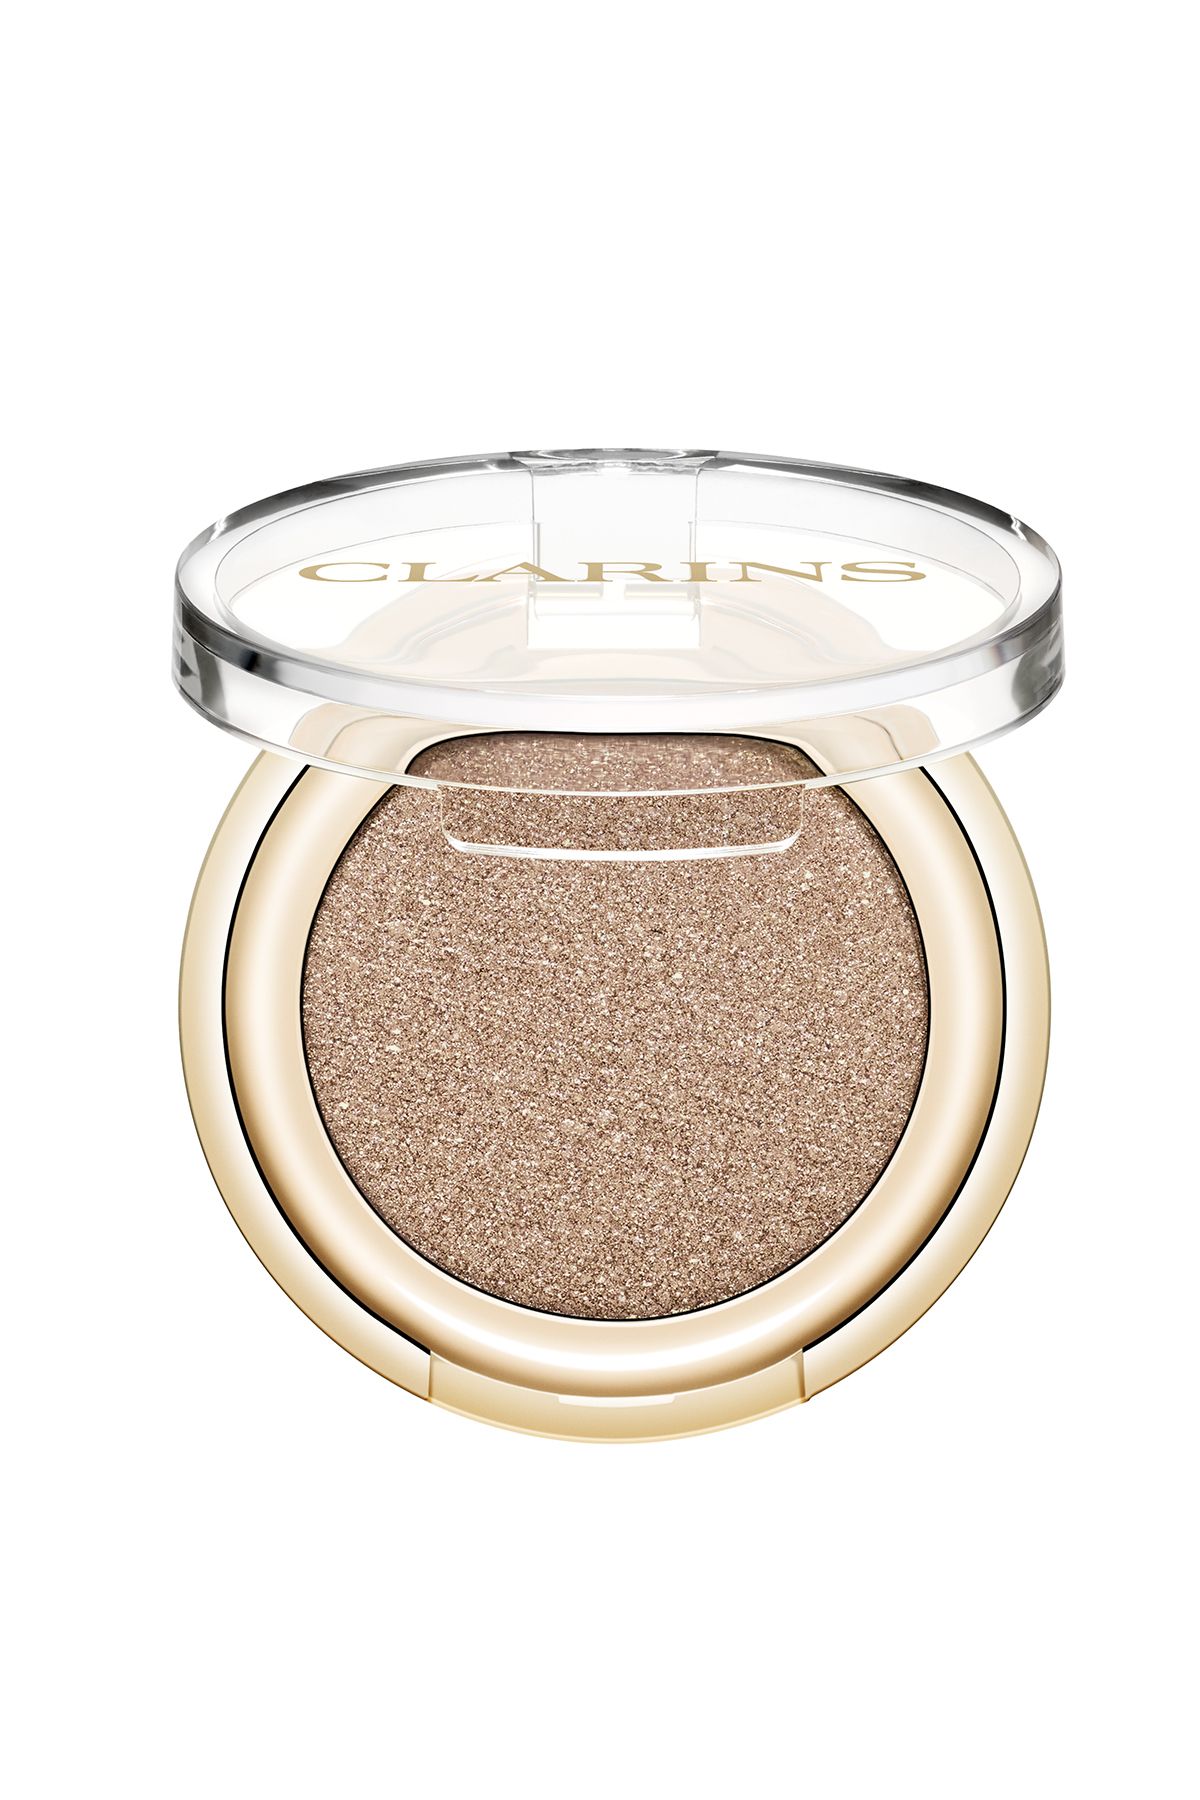 Clarins OMBRE SKIN 03 23